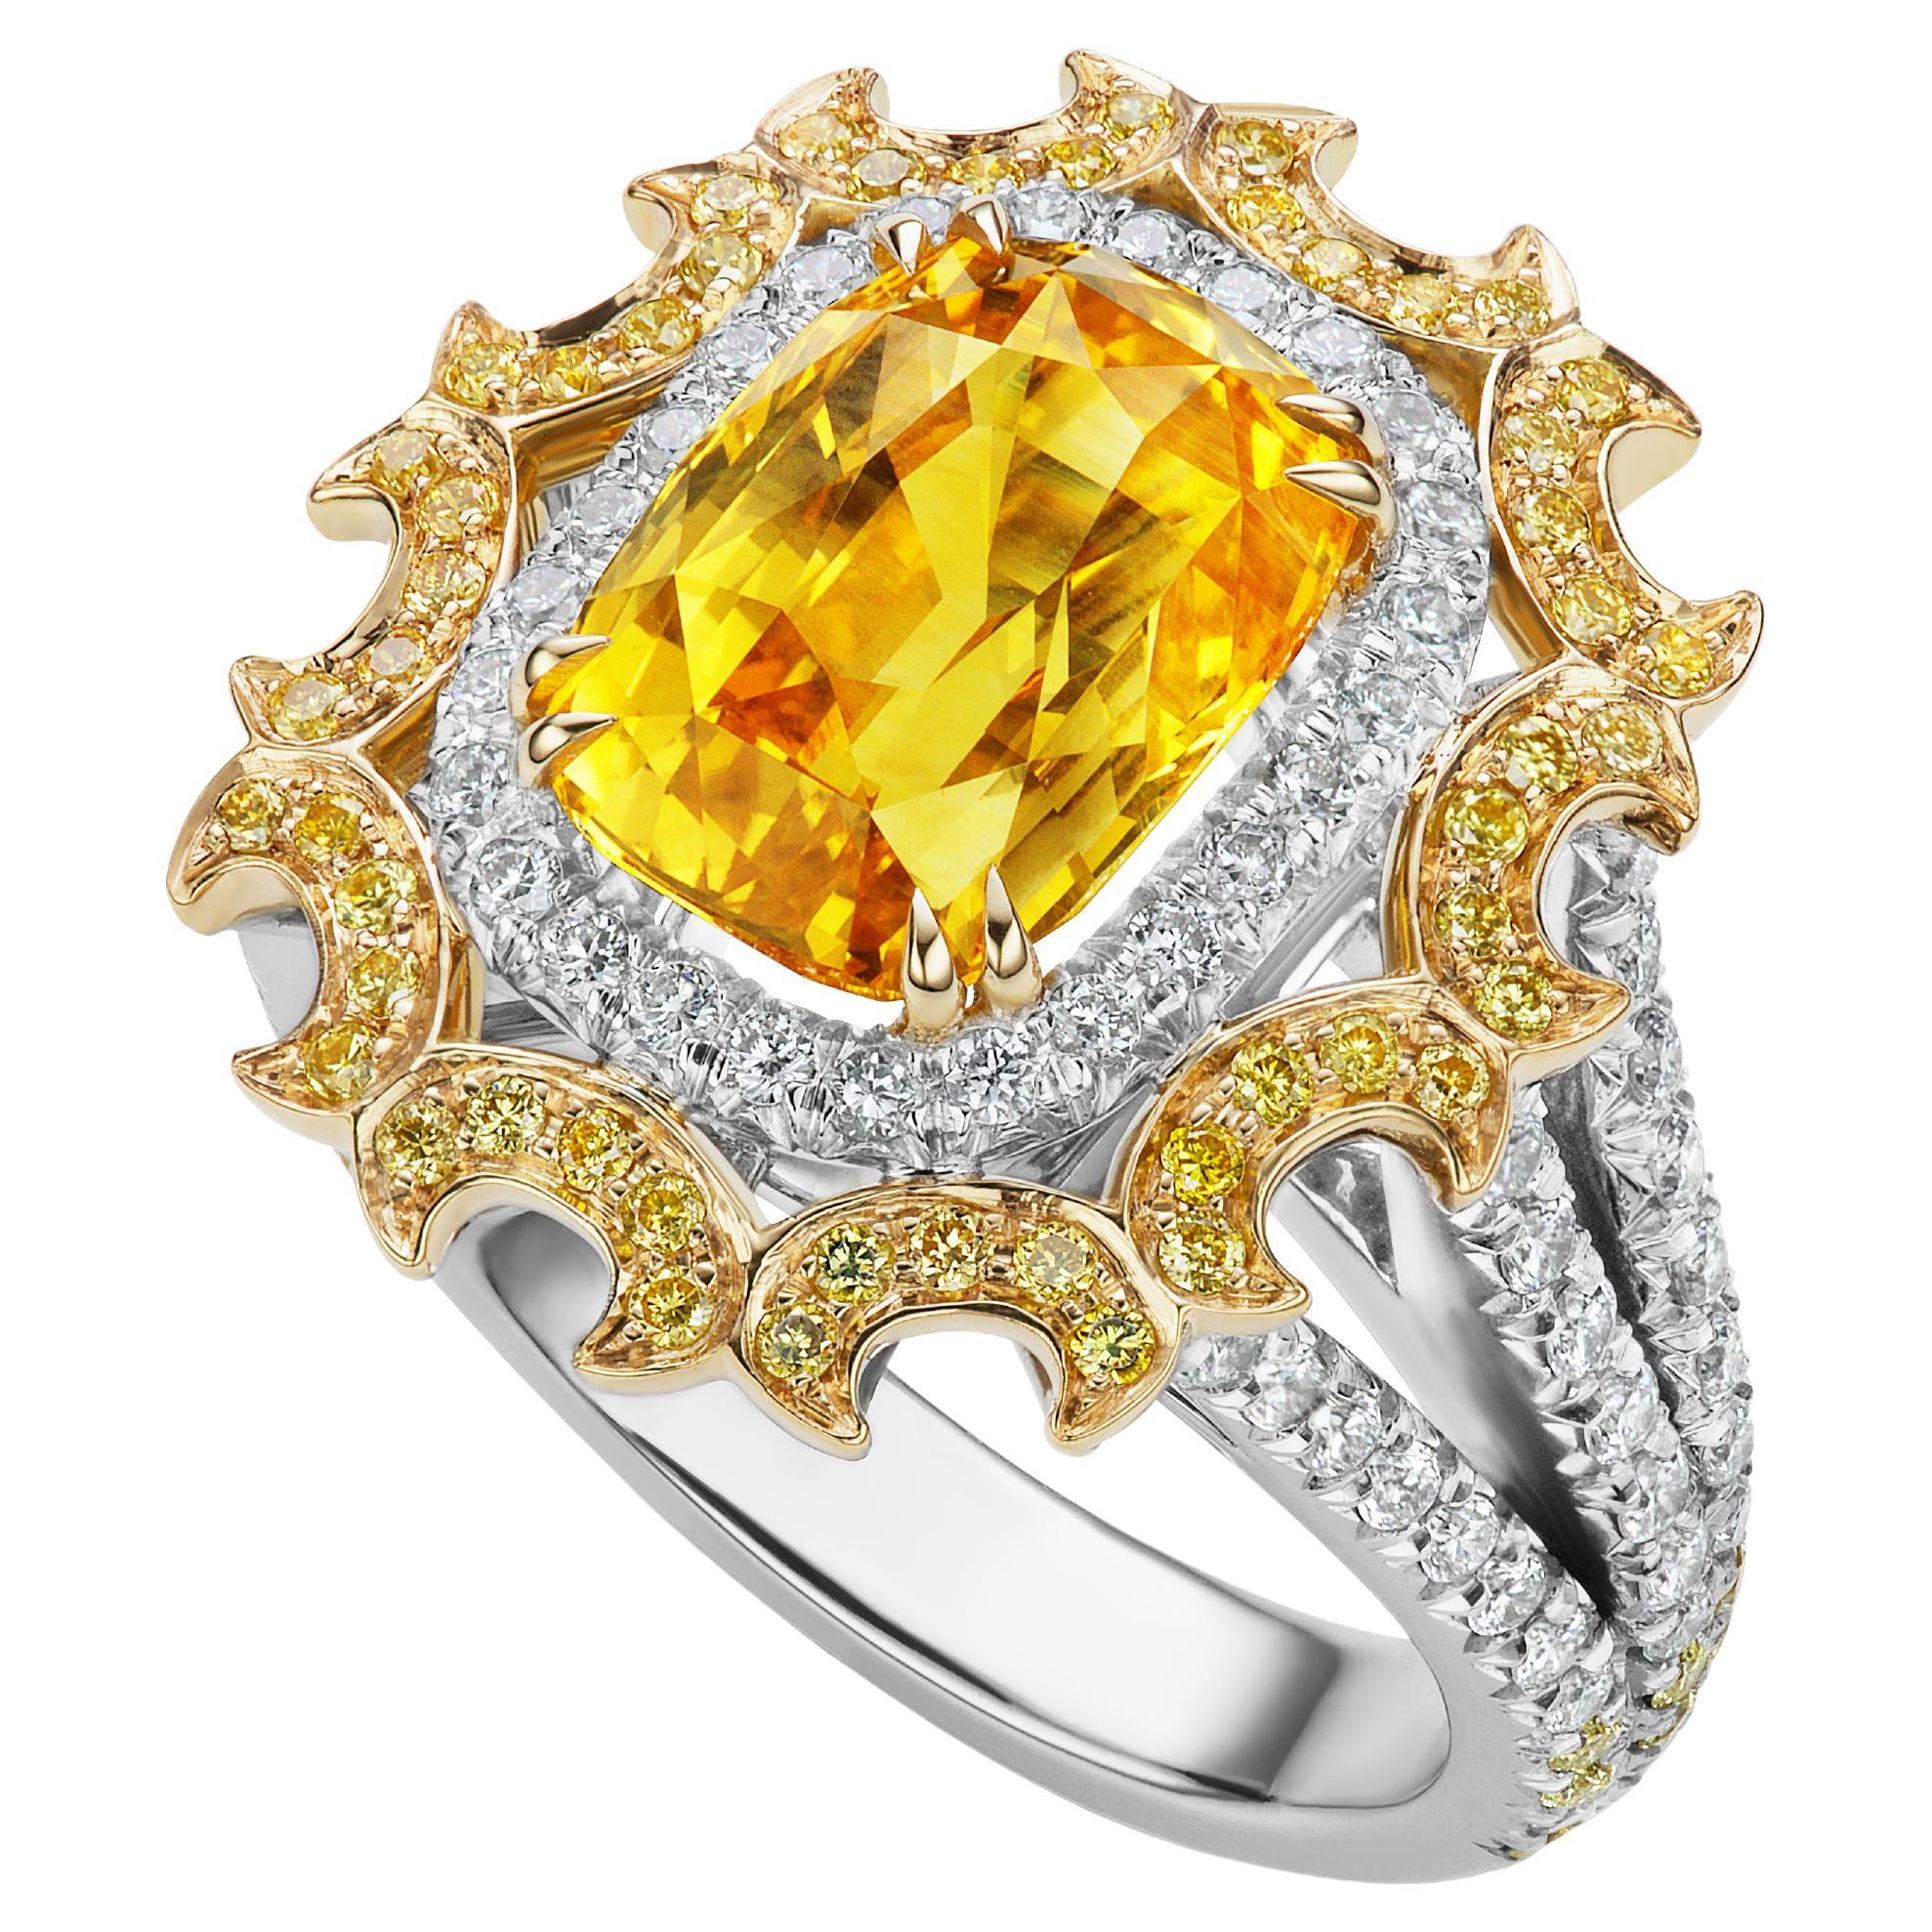 5.13ct Cushion Cut Yellow Sapphire & Diamond Ring in 18k Yellow Gold & Platinum For Sale